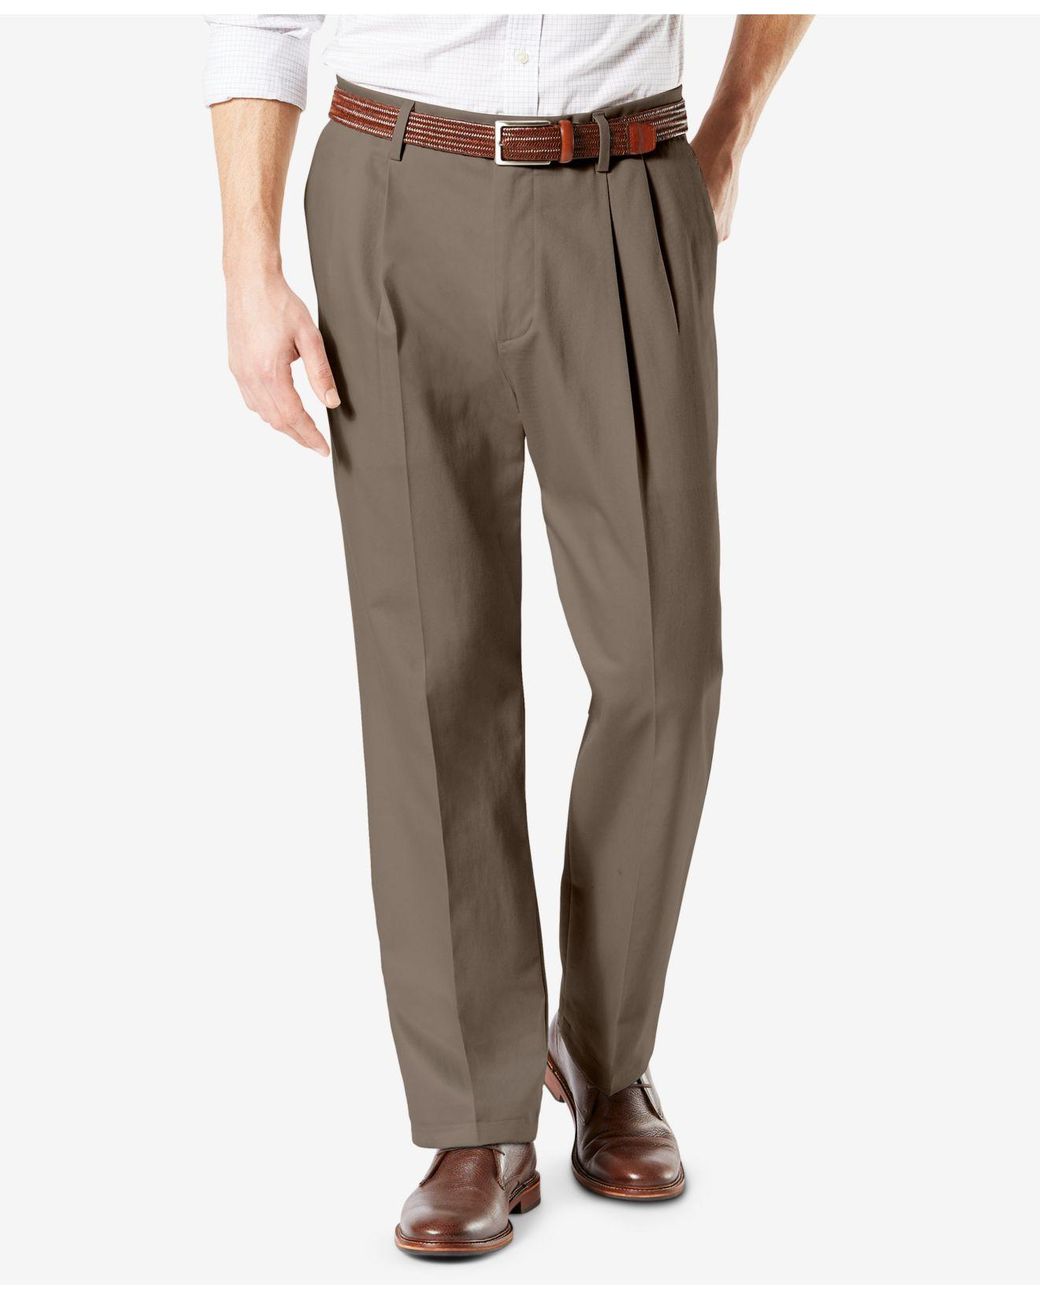 Dockers Signature Lux Cotton Classic Fit Pleated Creased Stretch Khaki ...